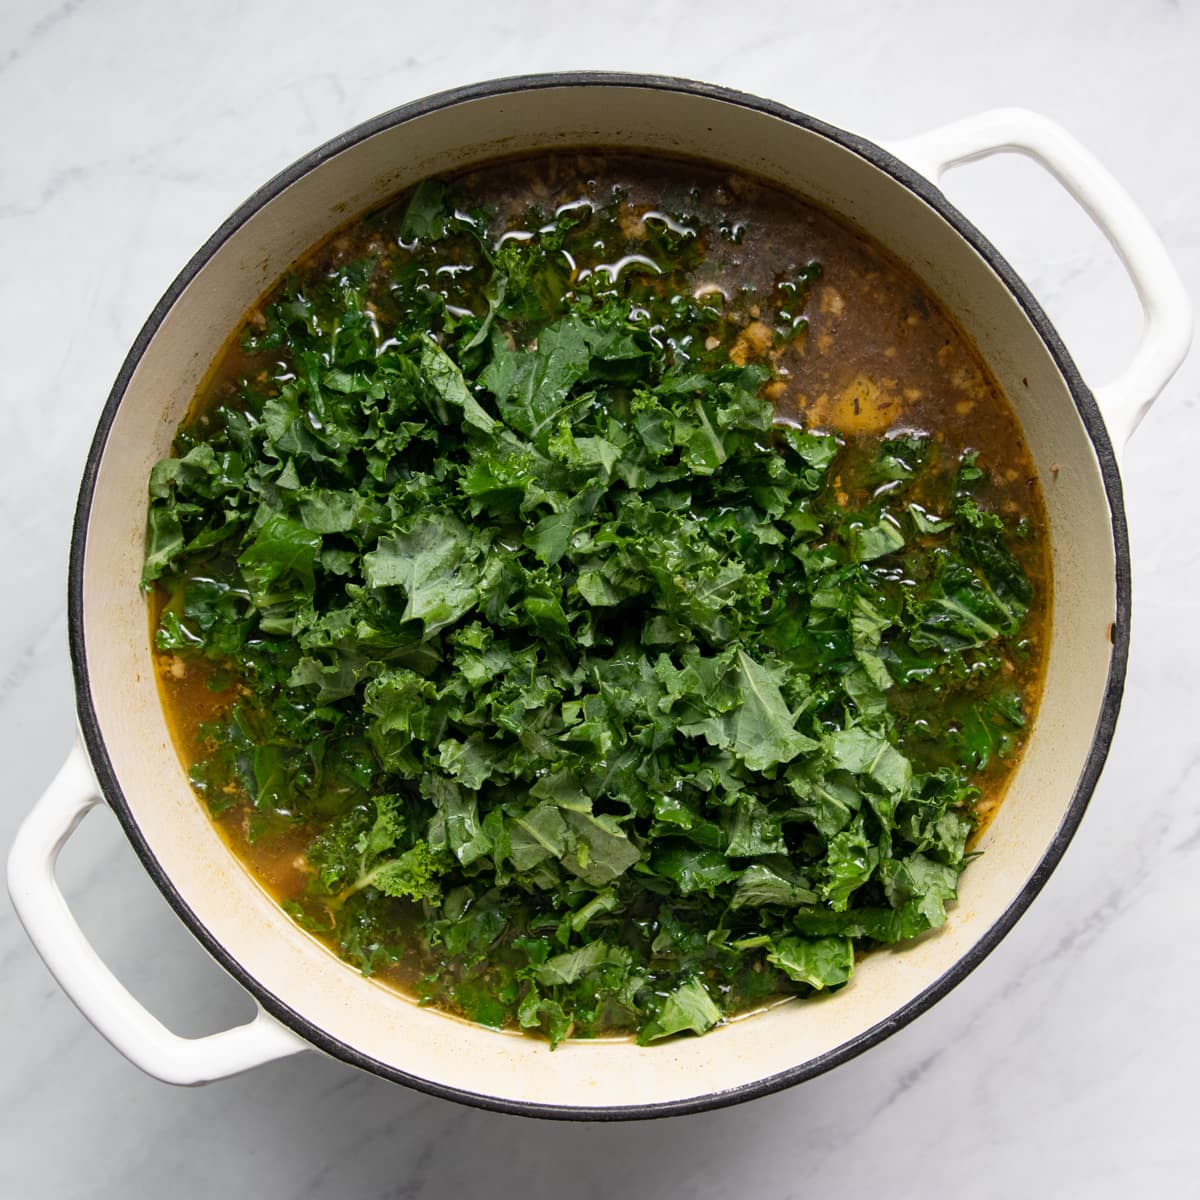 Chopped kale has been placed on the top of soup cooked in a Dutch oven.